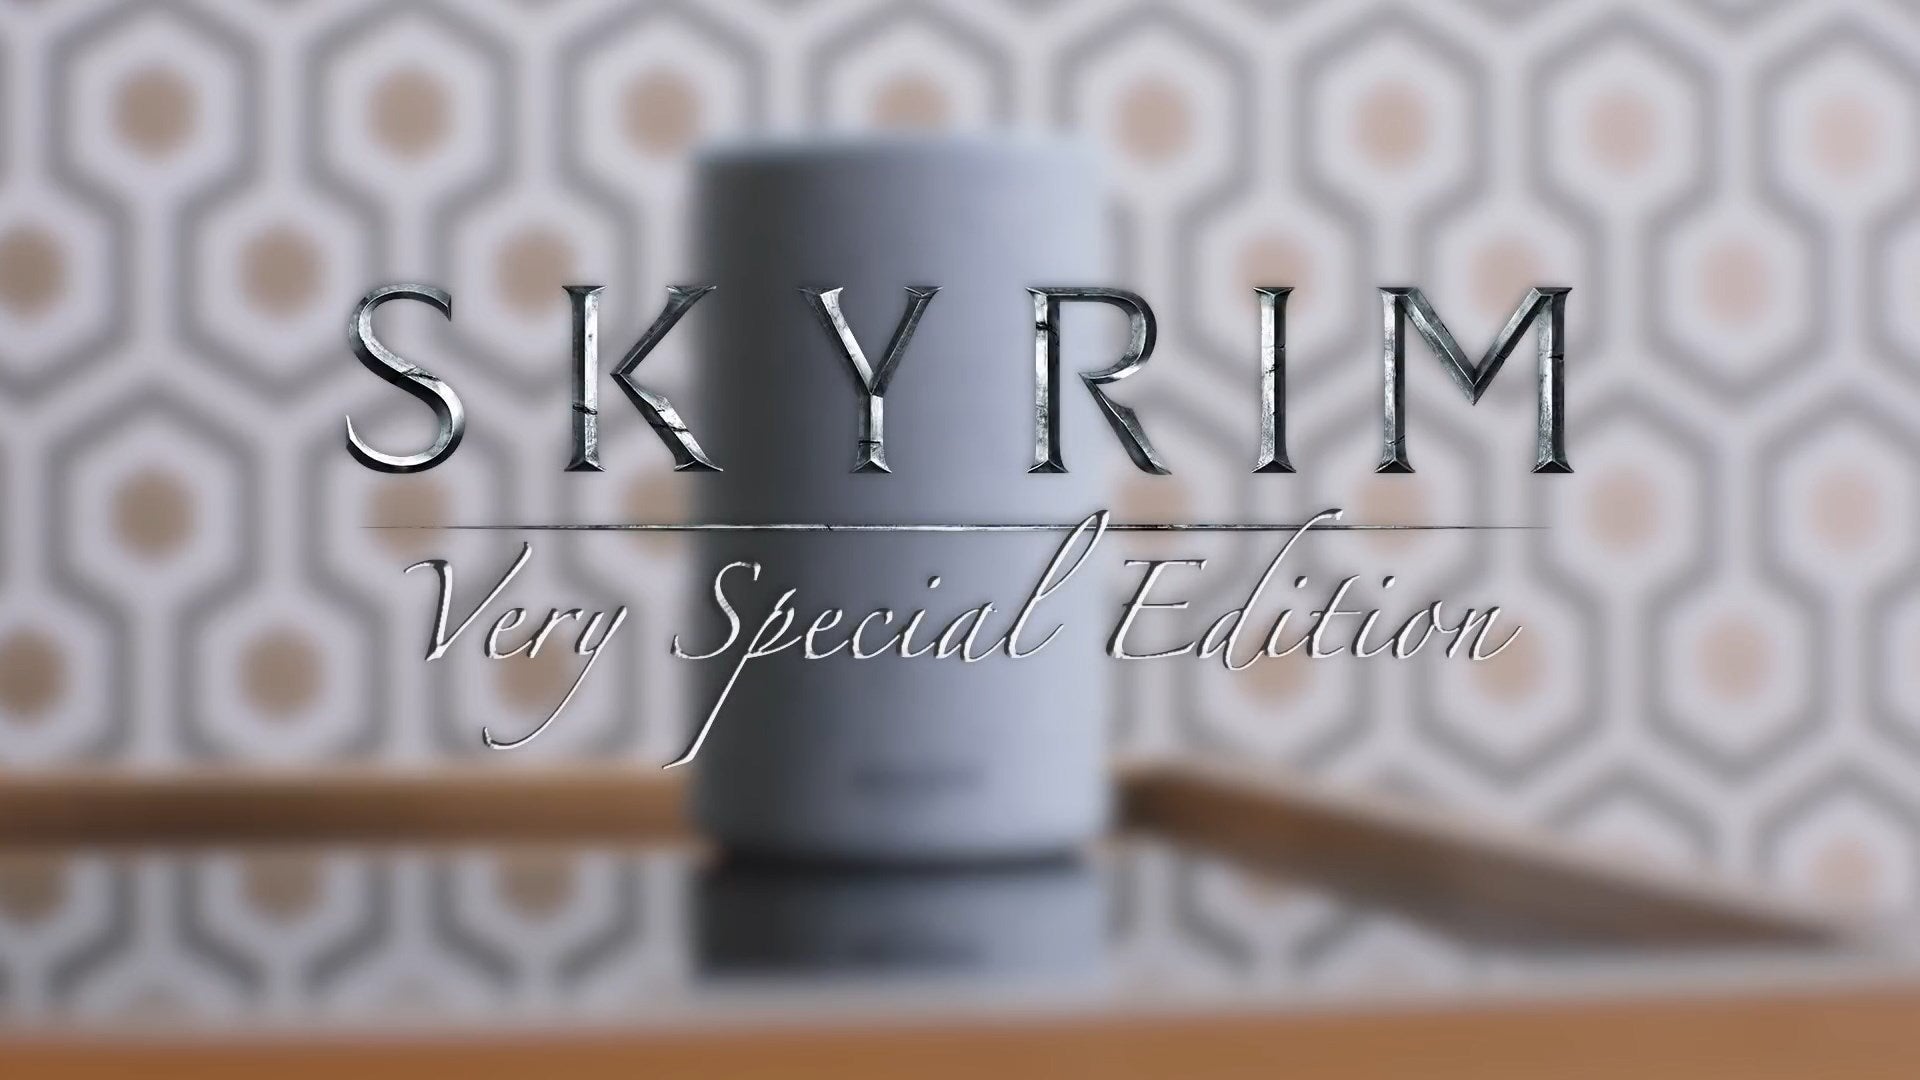 Image for That Skyrim: Very Special Edition goof from Bethesda's E3 2018 show is actually real